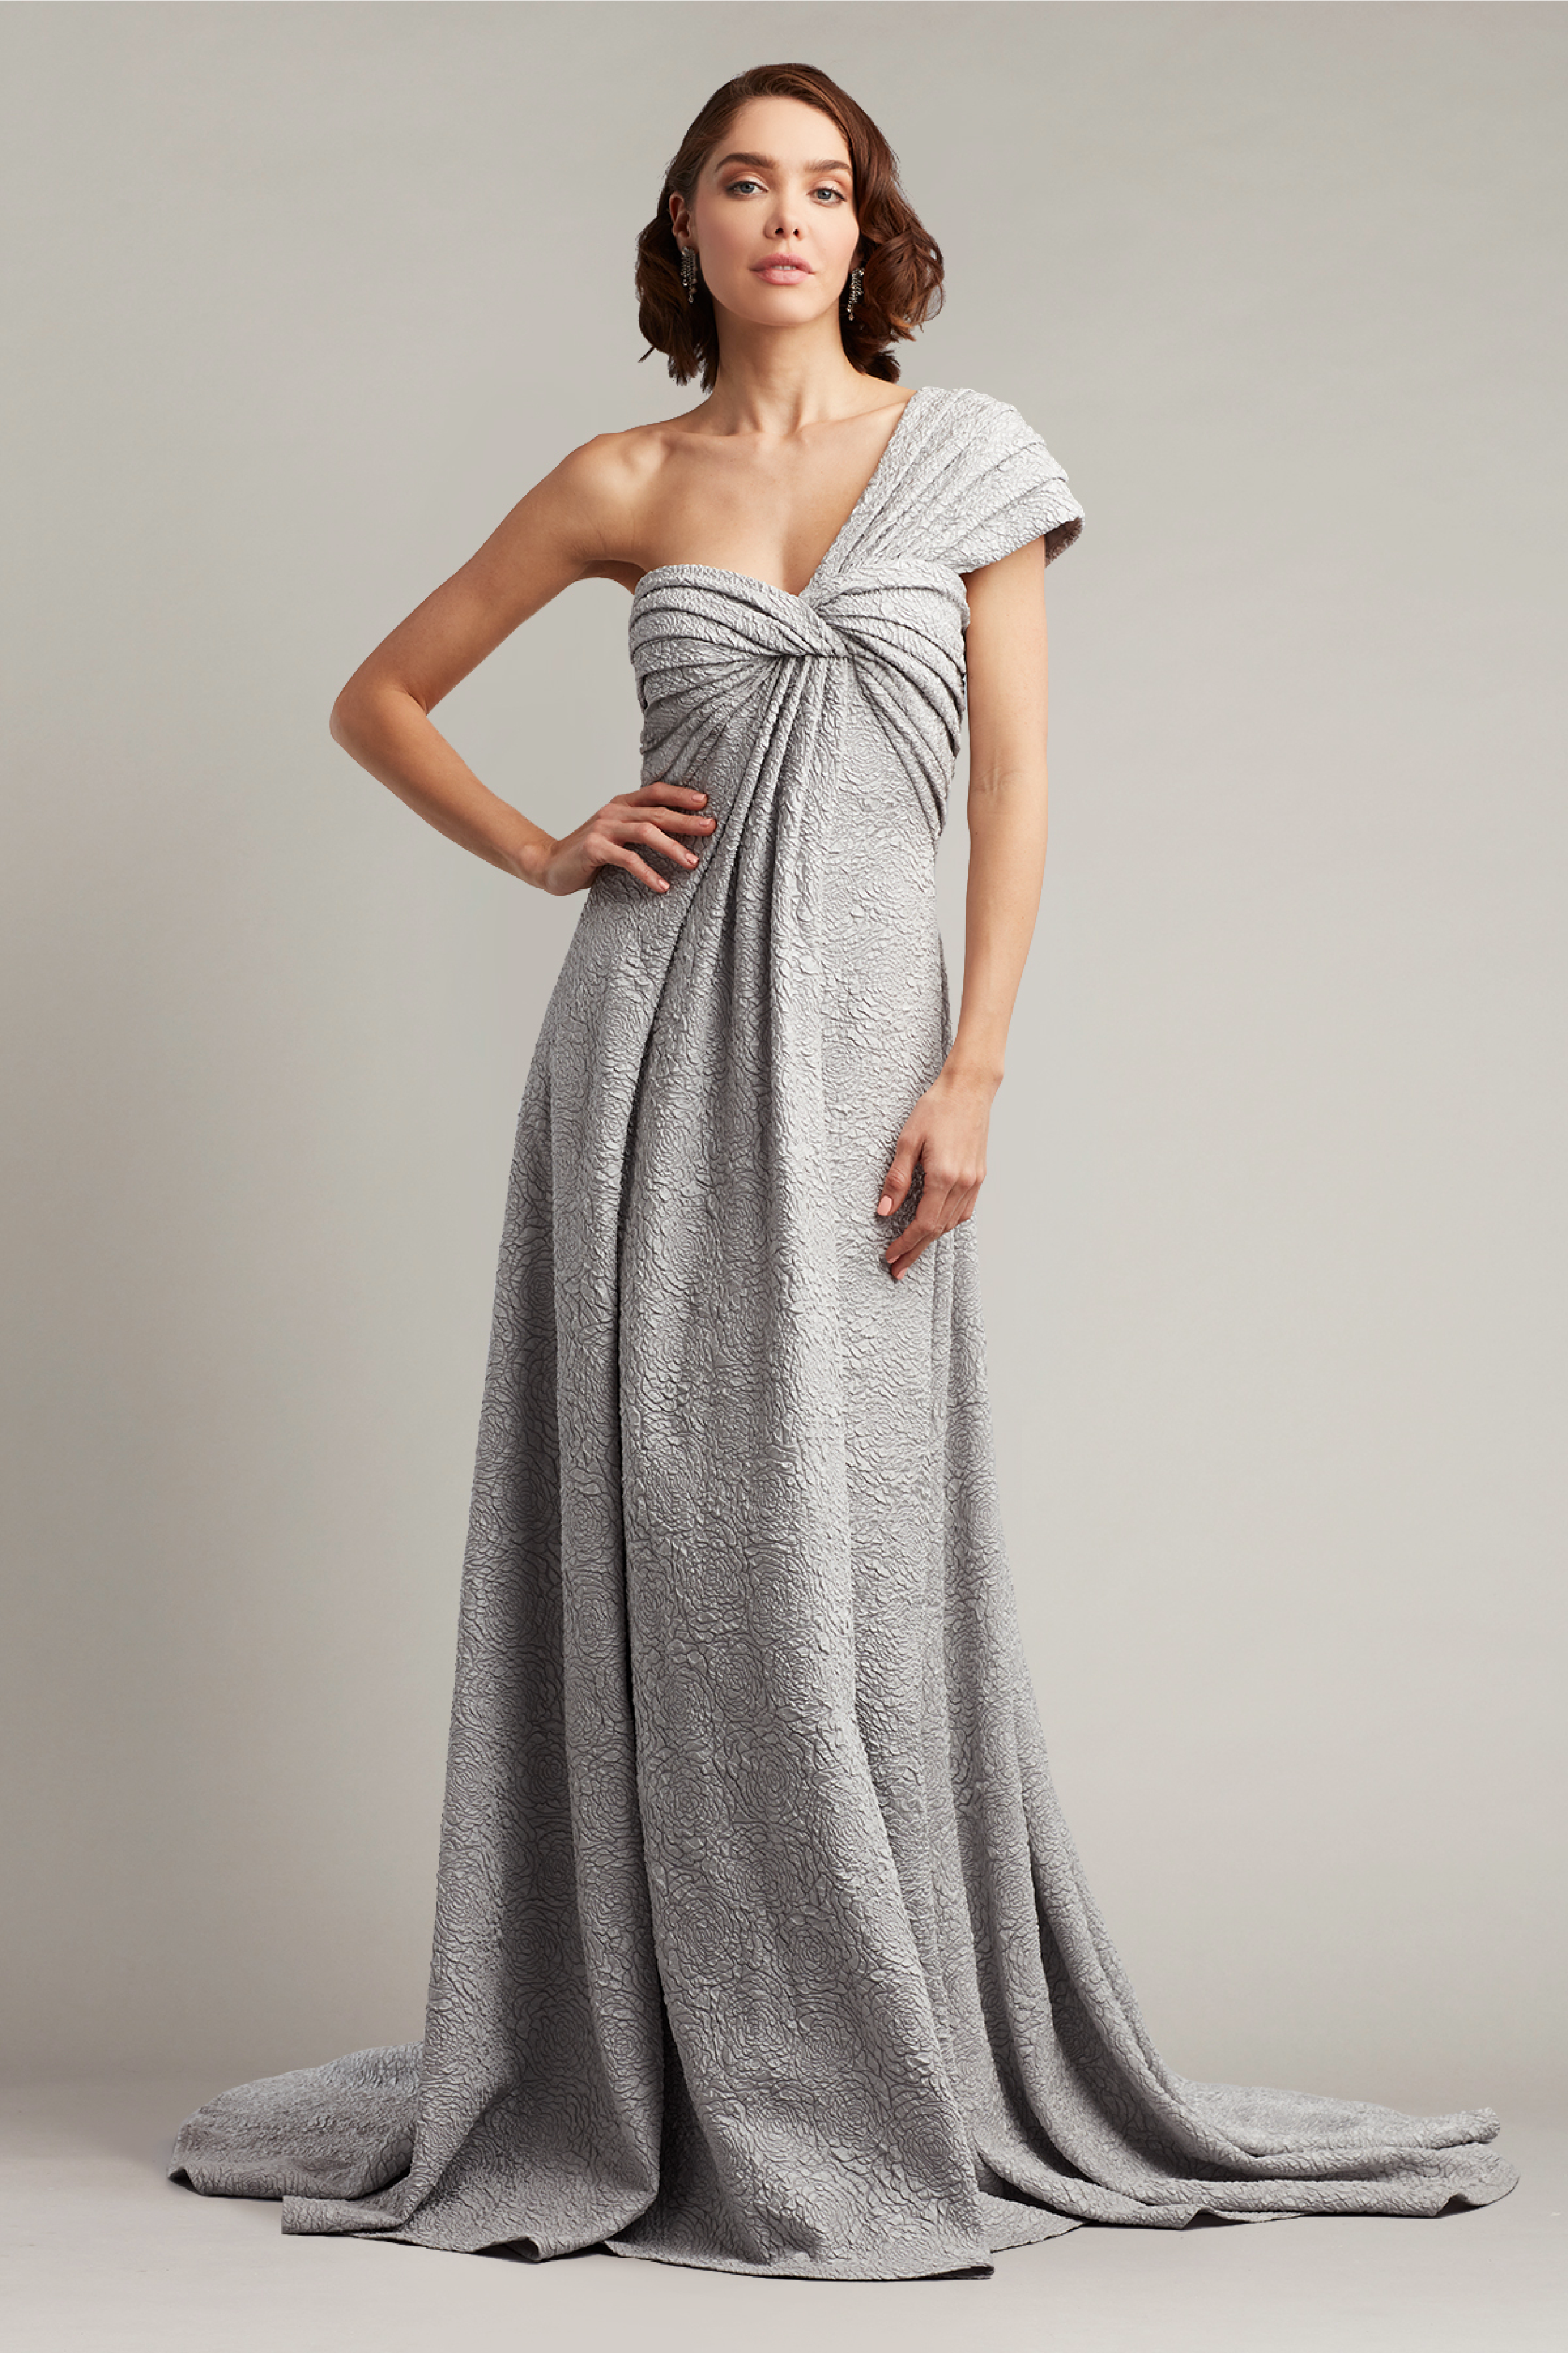 Draped Empire Gown